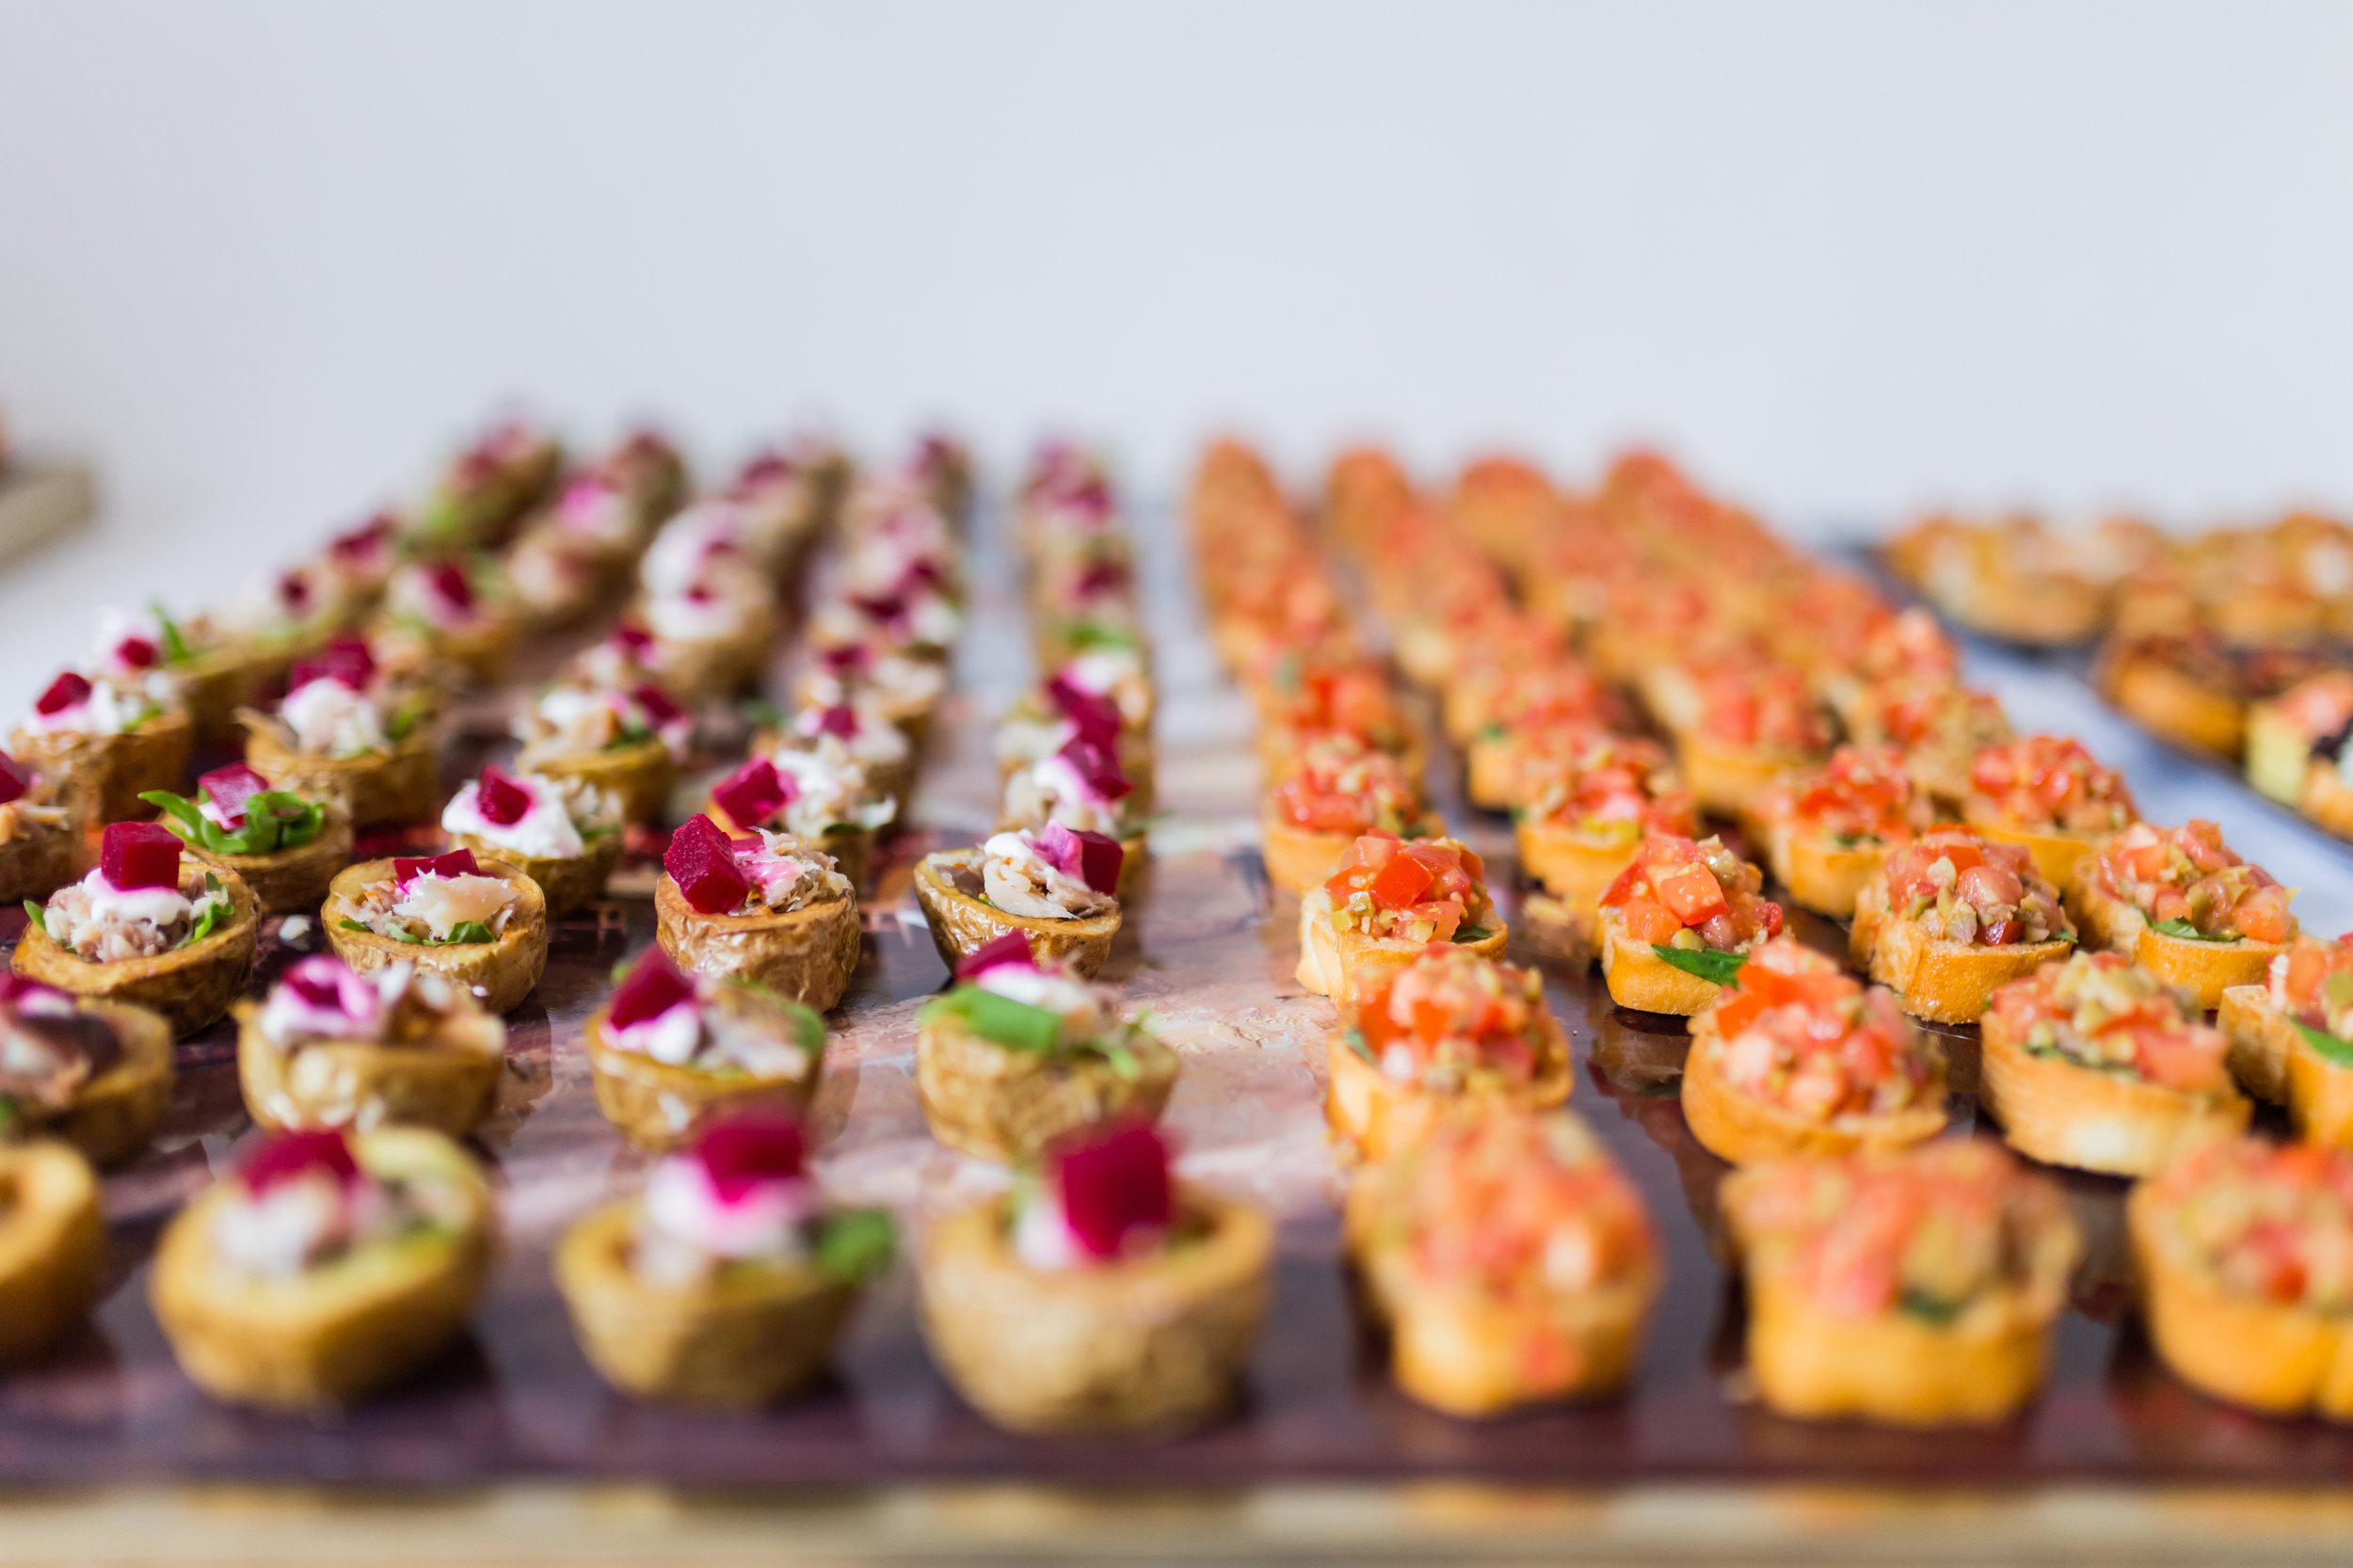 Selection-of-canapes-499468873_3869x2579 (1).jpeg